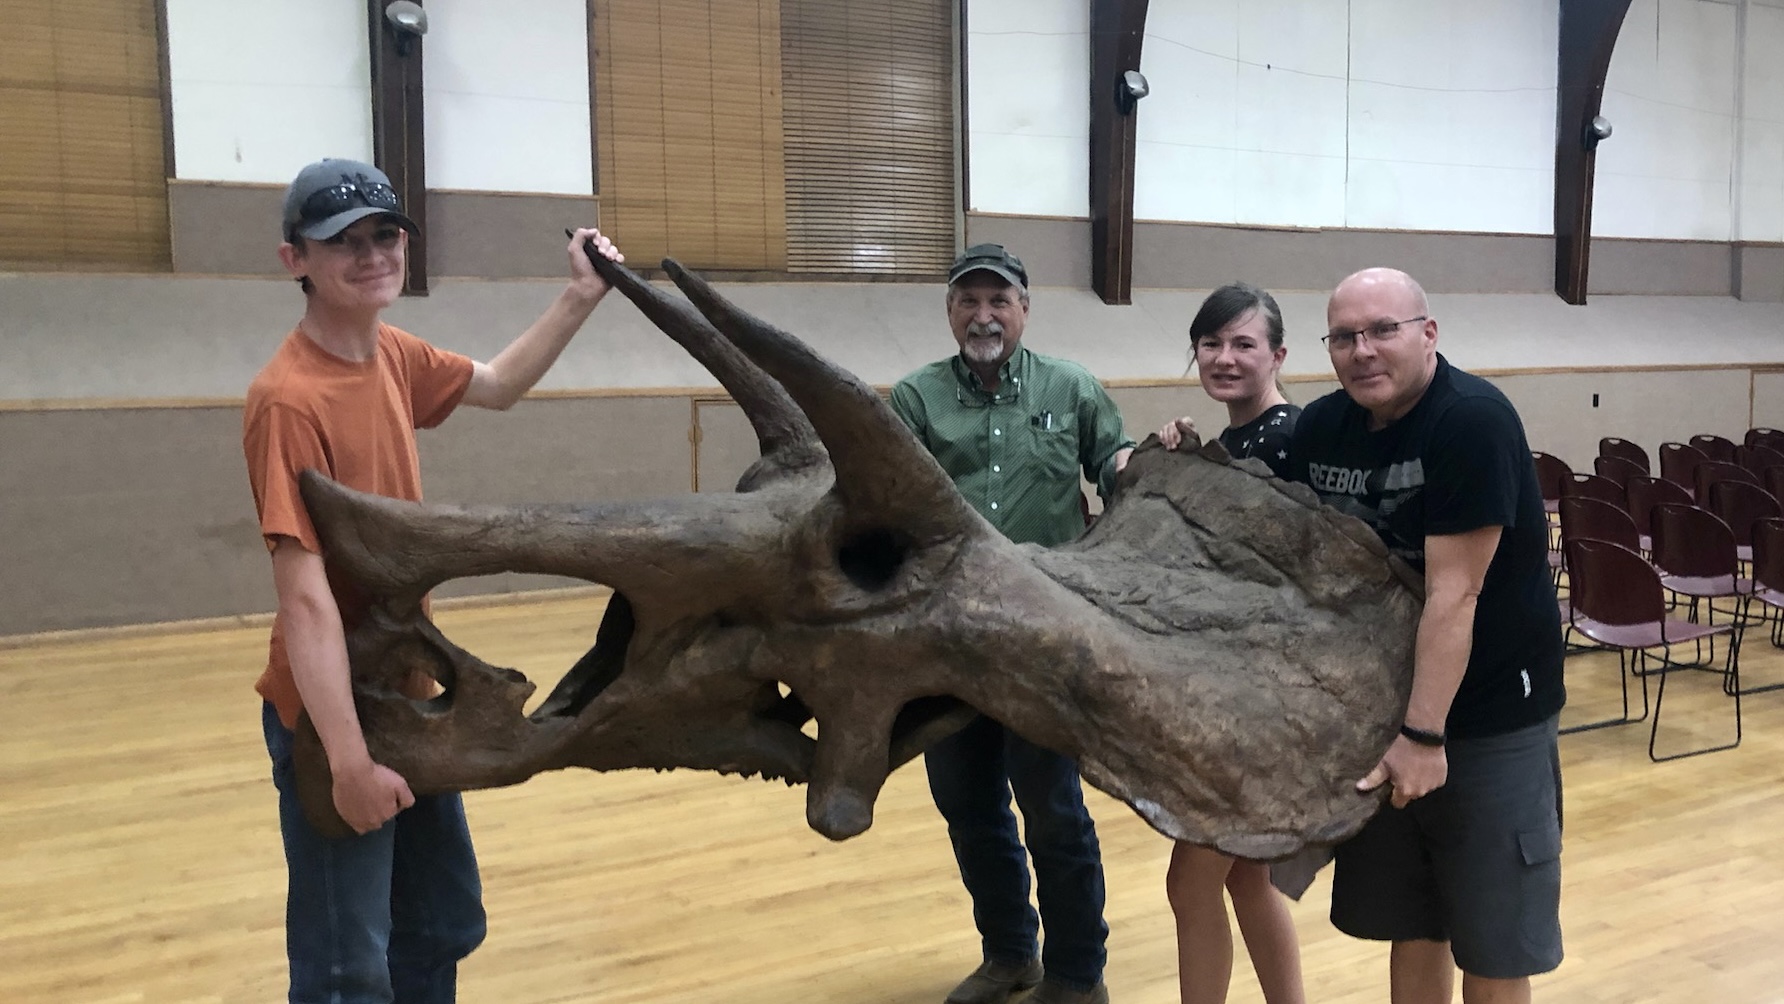 DINOSAURS COME ALIVE IN CODY AND WORLAND AT SEMINAR EVENT